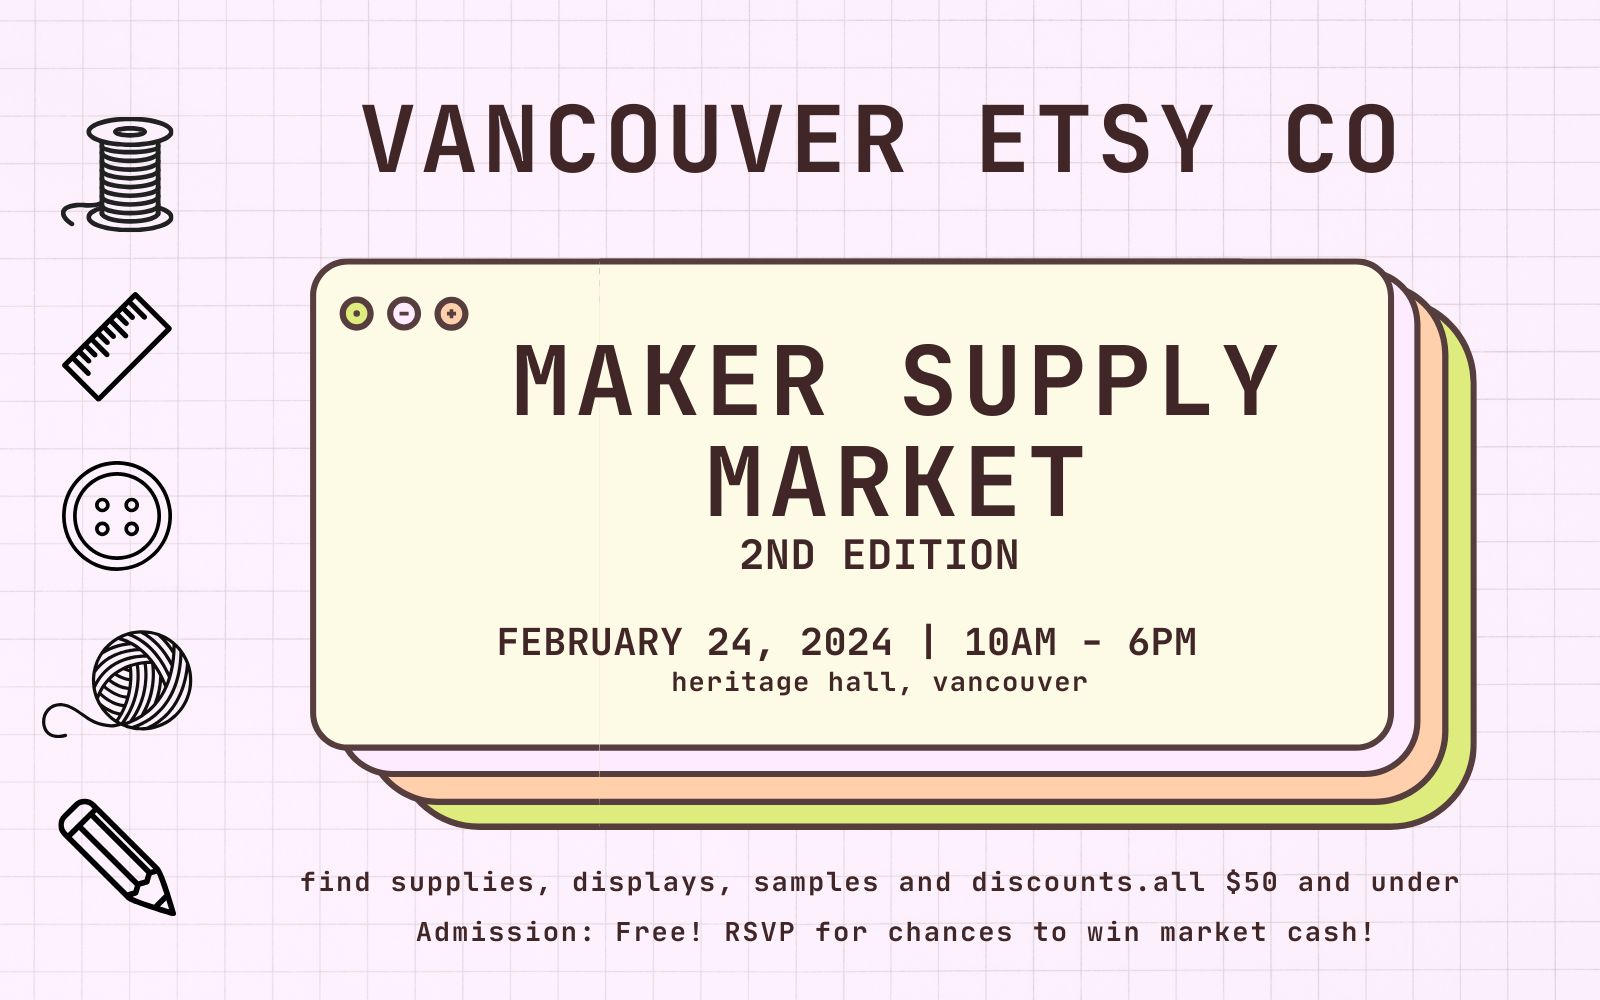 Maker Supply Market - 2nd Edition, Vancouver, British Columbia, Canada